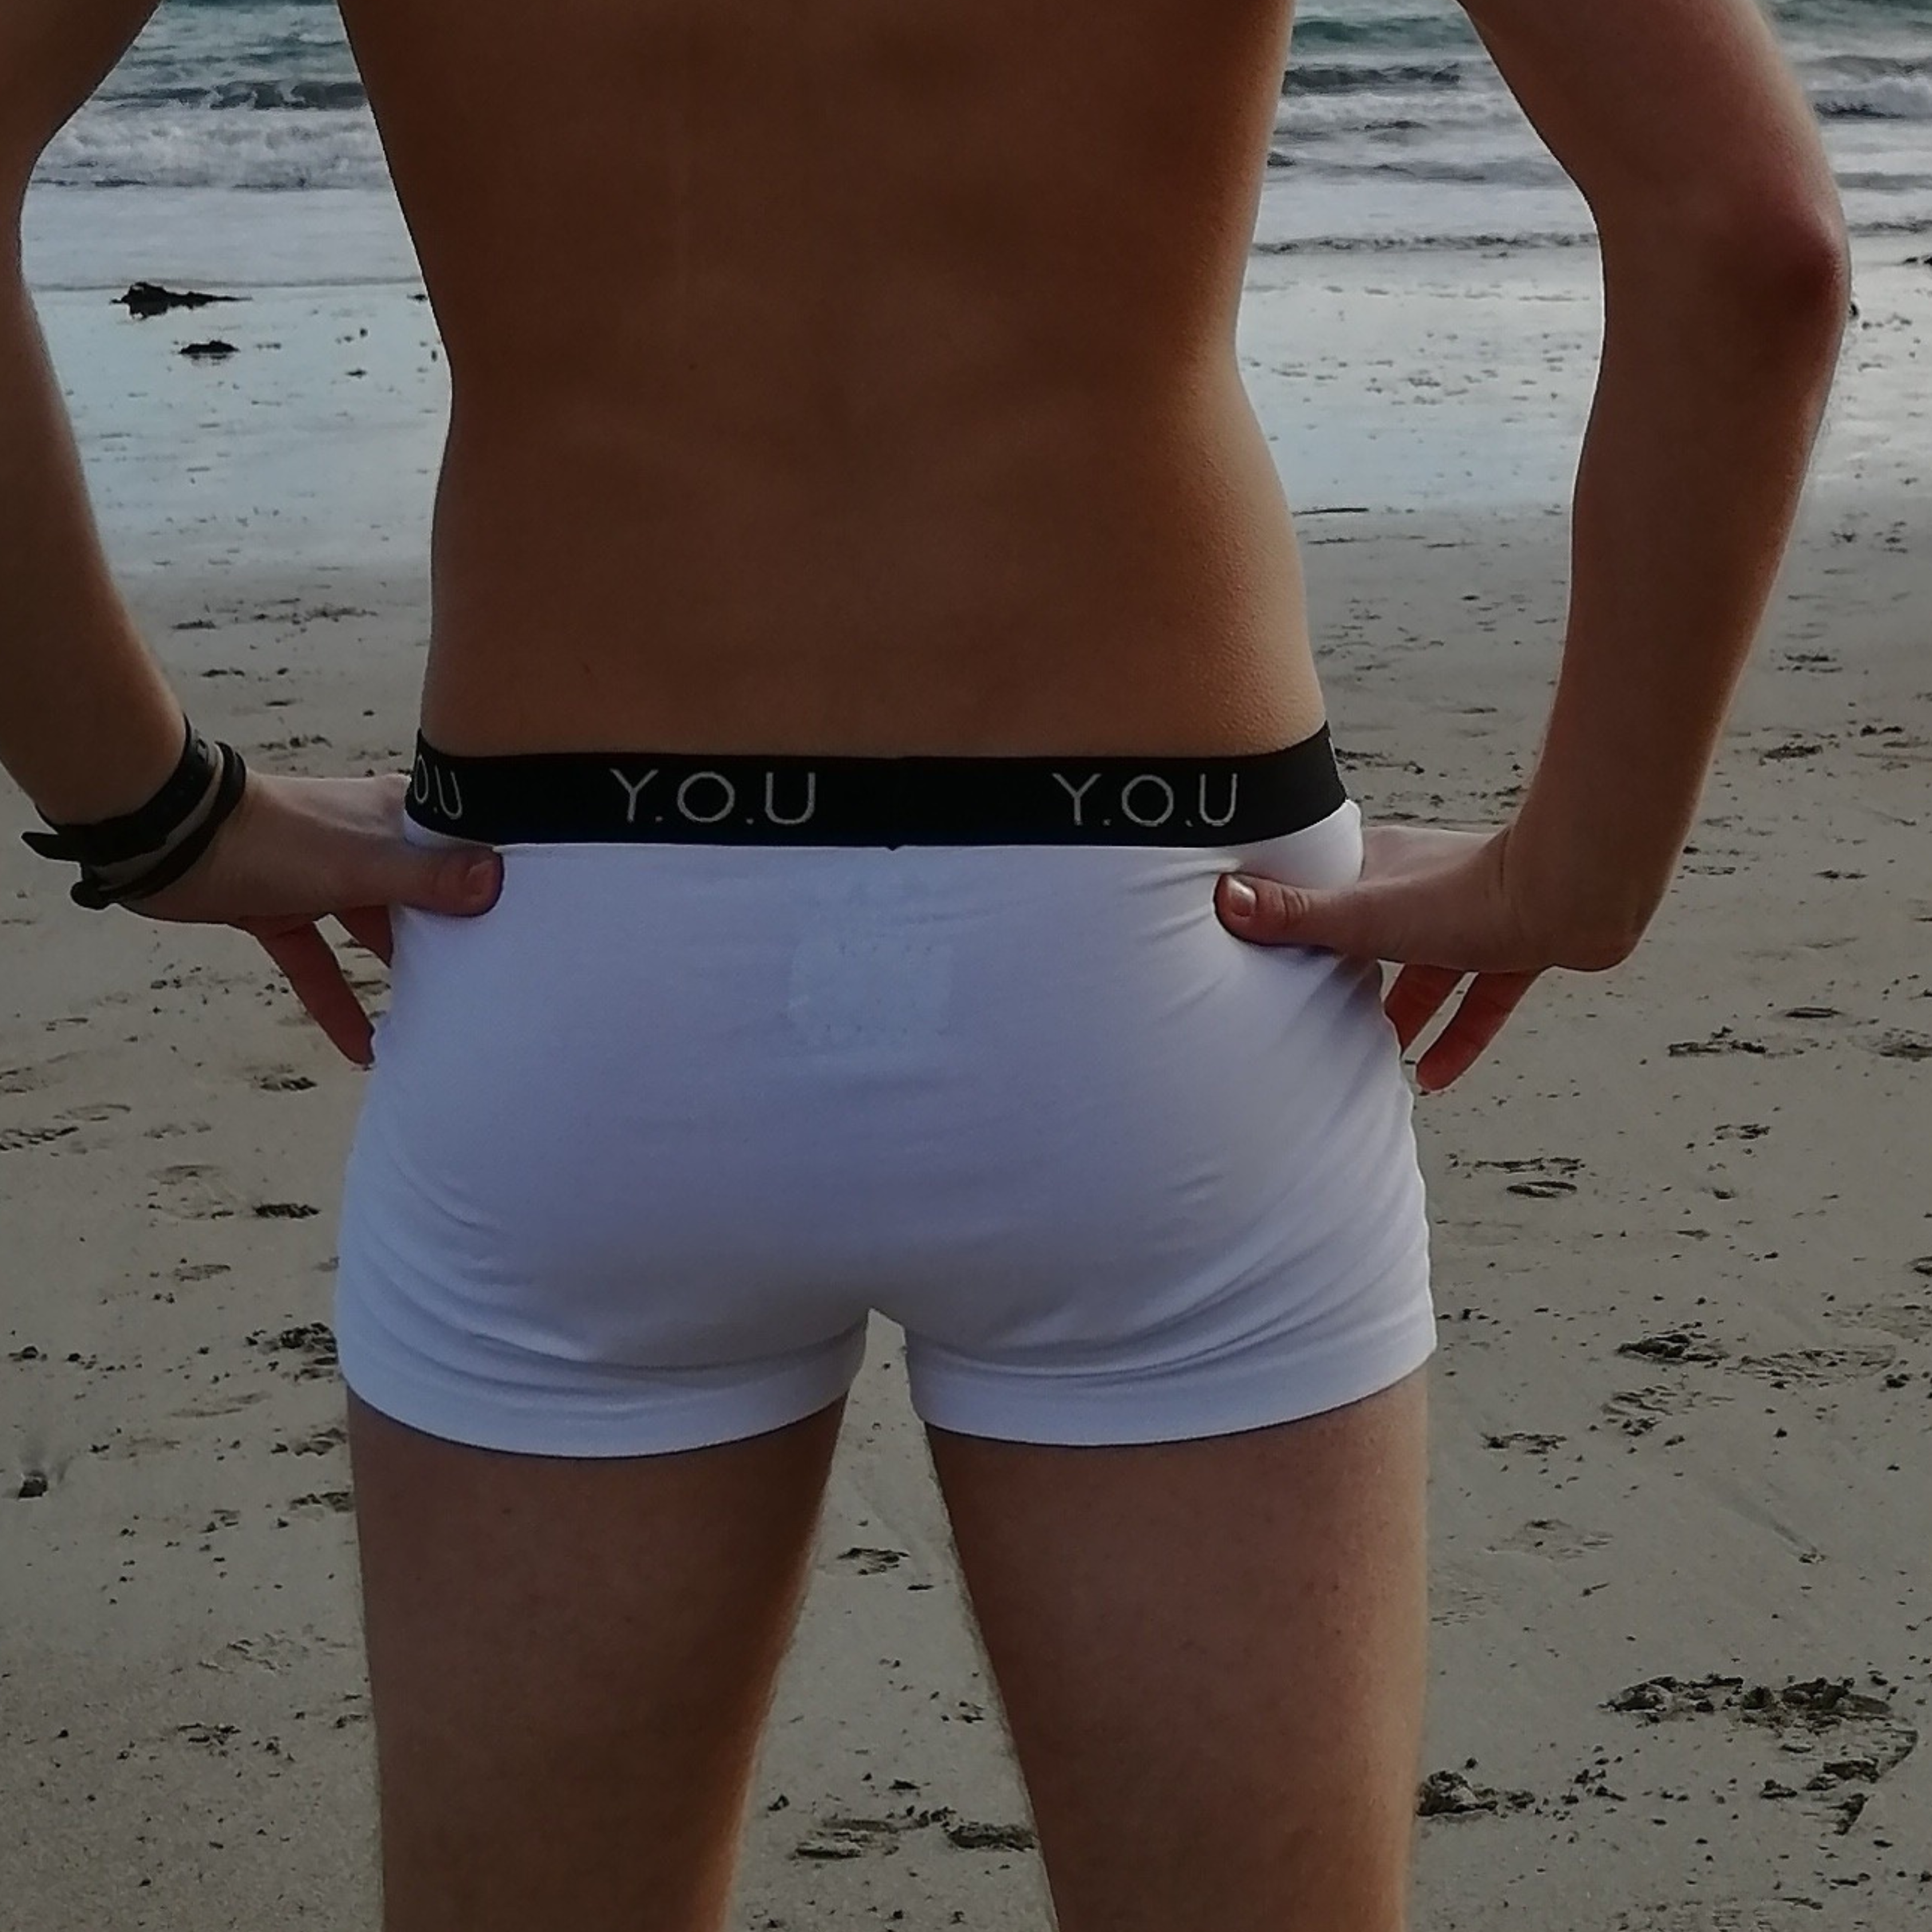 A person with bare upper body stands on a sandy beach facing the ocean, wearing white men’s hipster trunks, with "Y.O.U" written on the waistband. The person has their hands on their hips. Waves are visible in the background.